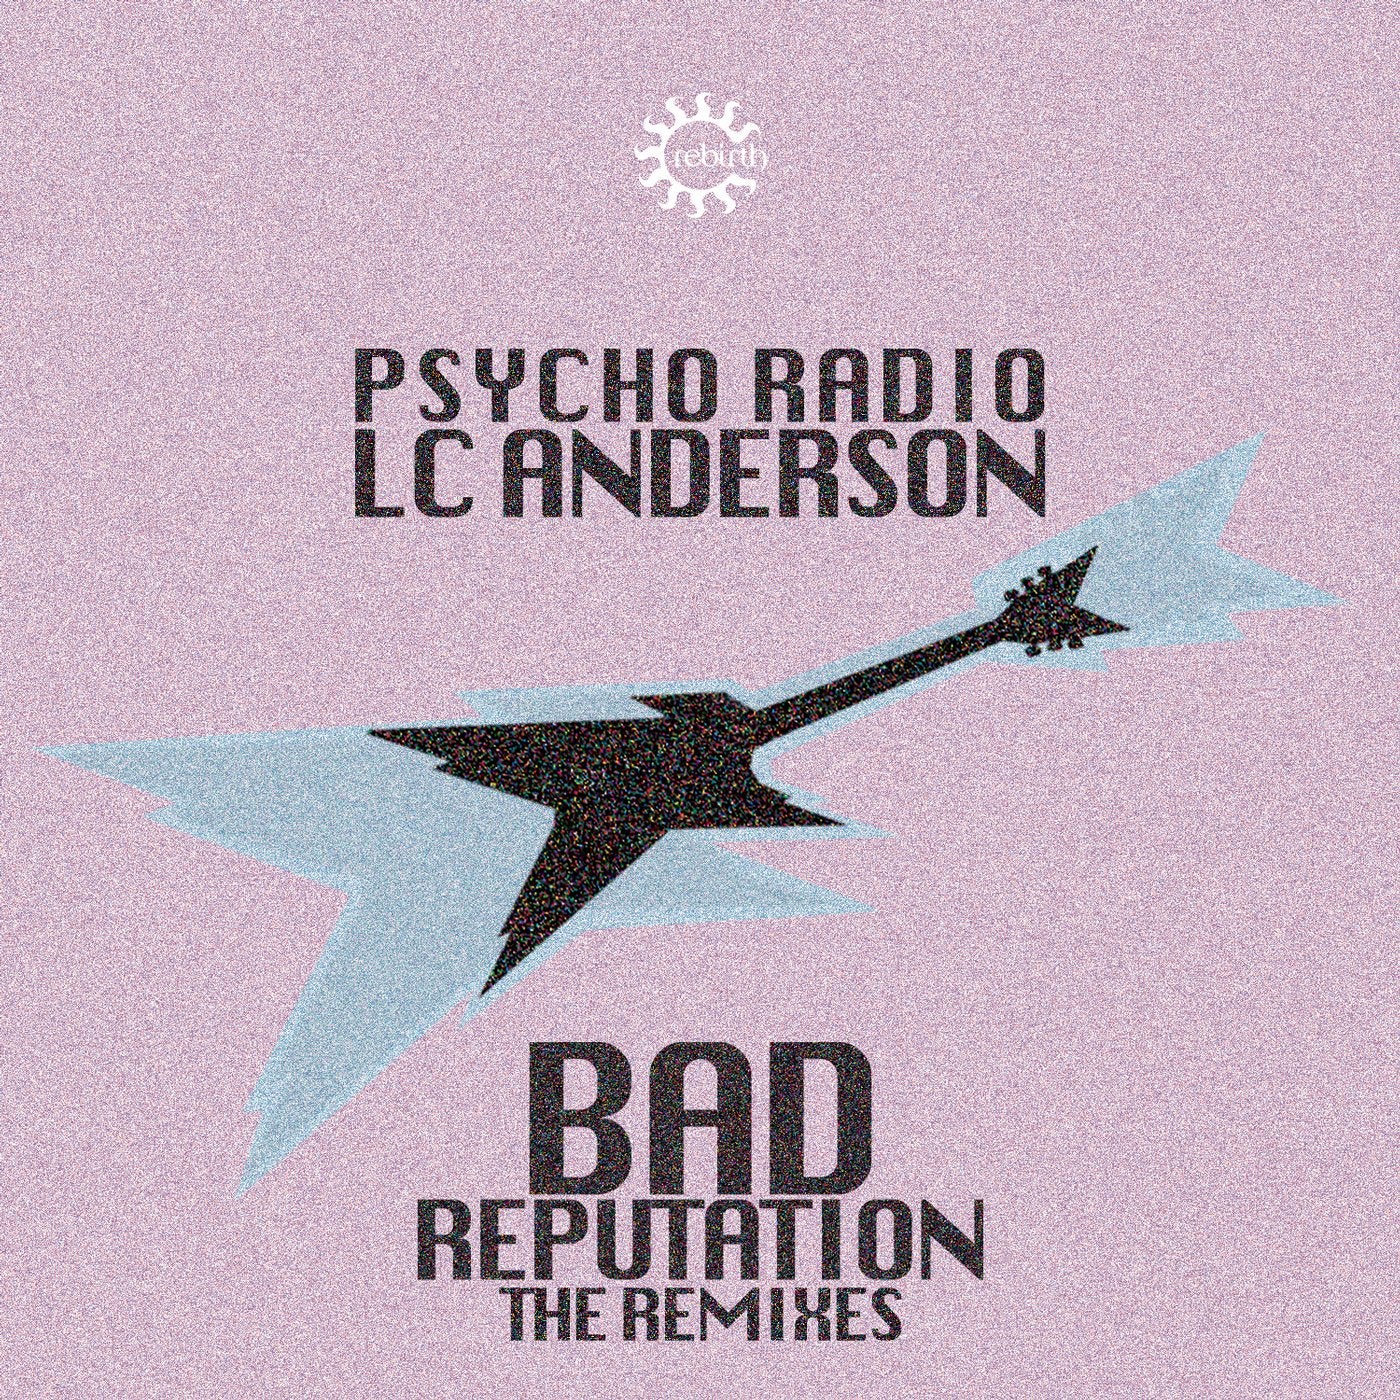 Feeling coming back. Bad reputation. Psycho Radio– Sound is Shocking. By Paul Anderson Red Remix. Psycho Dreams semansgocrazy Remix.